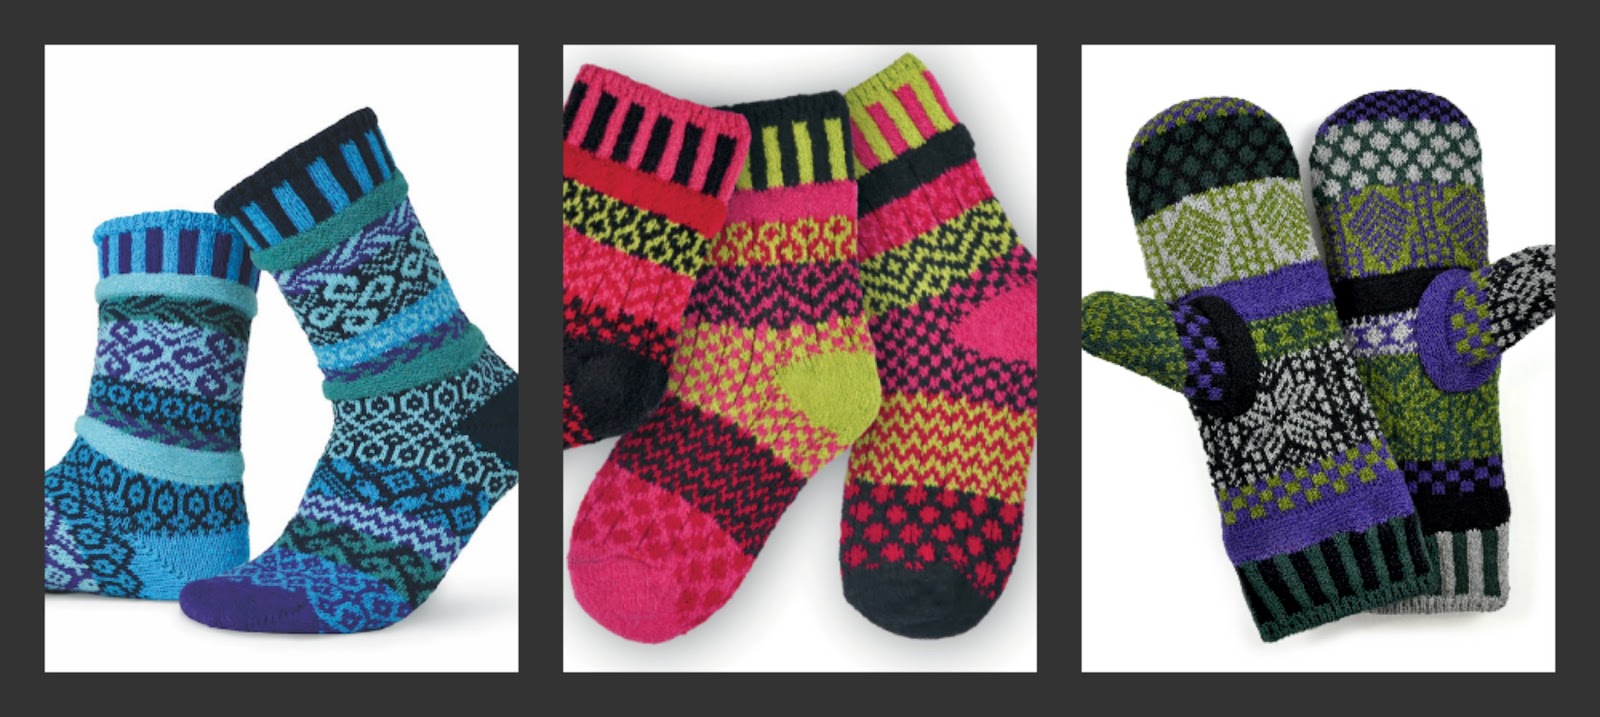 DCIN’s Annual Mismatched Socks and MORE! Fundraiser 9/9/17 – 10/8/17